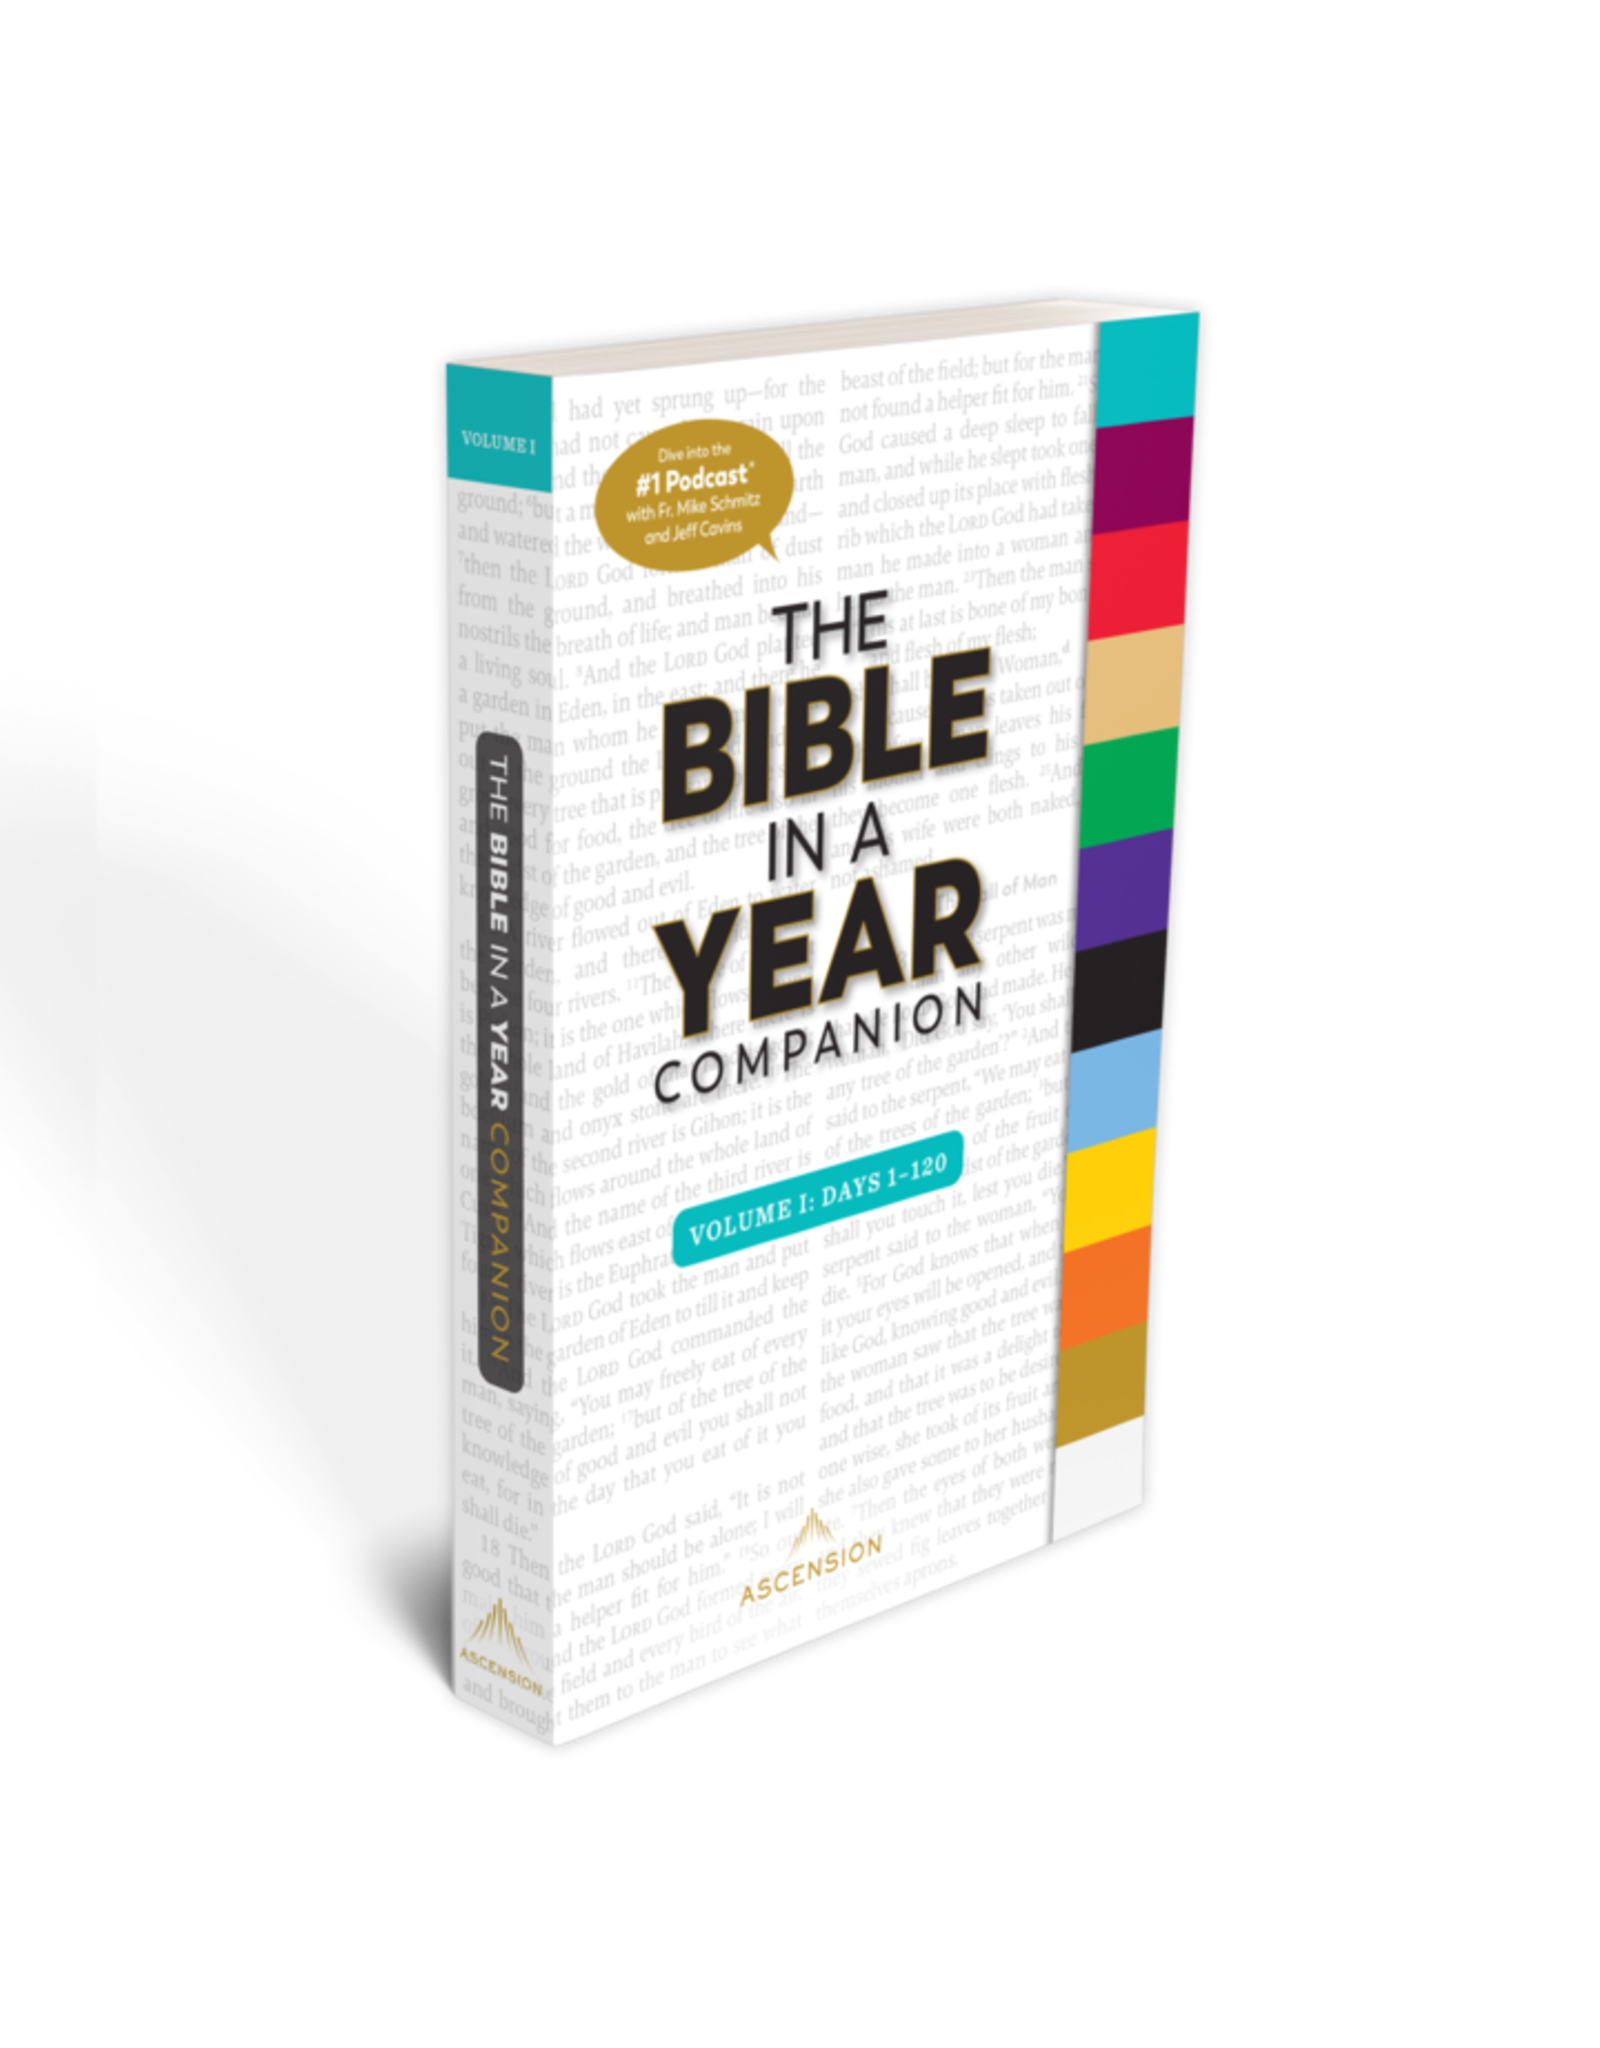 Bible in a Year Companion, Volume I (out of stock and estimating a restock date of March)